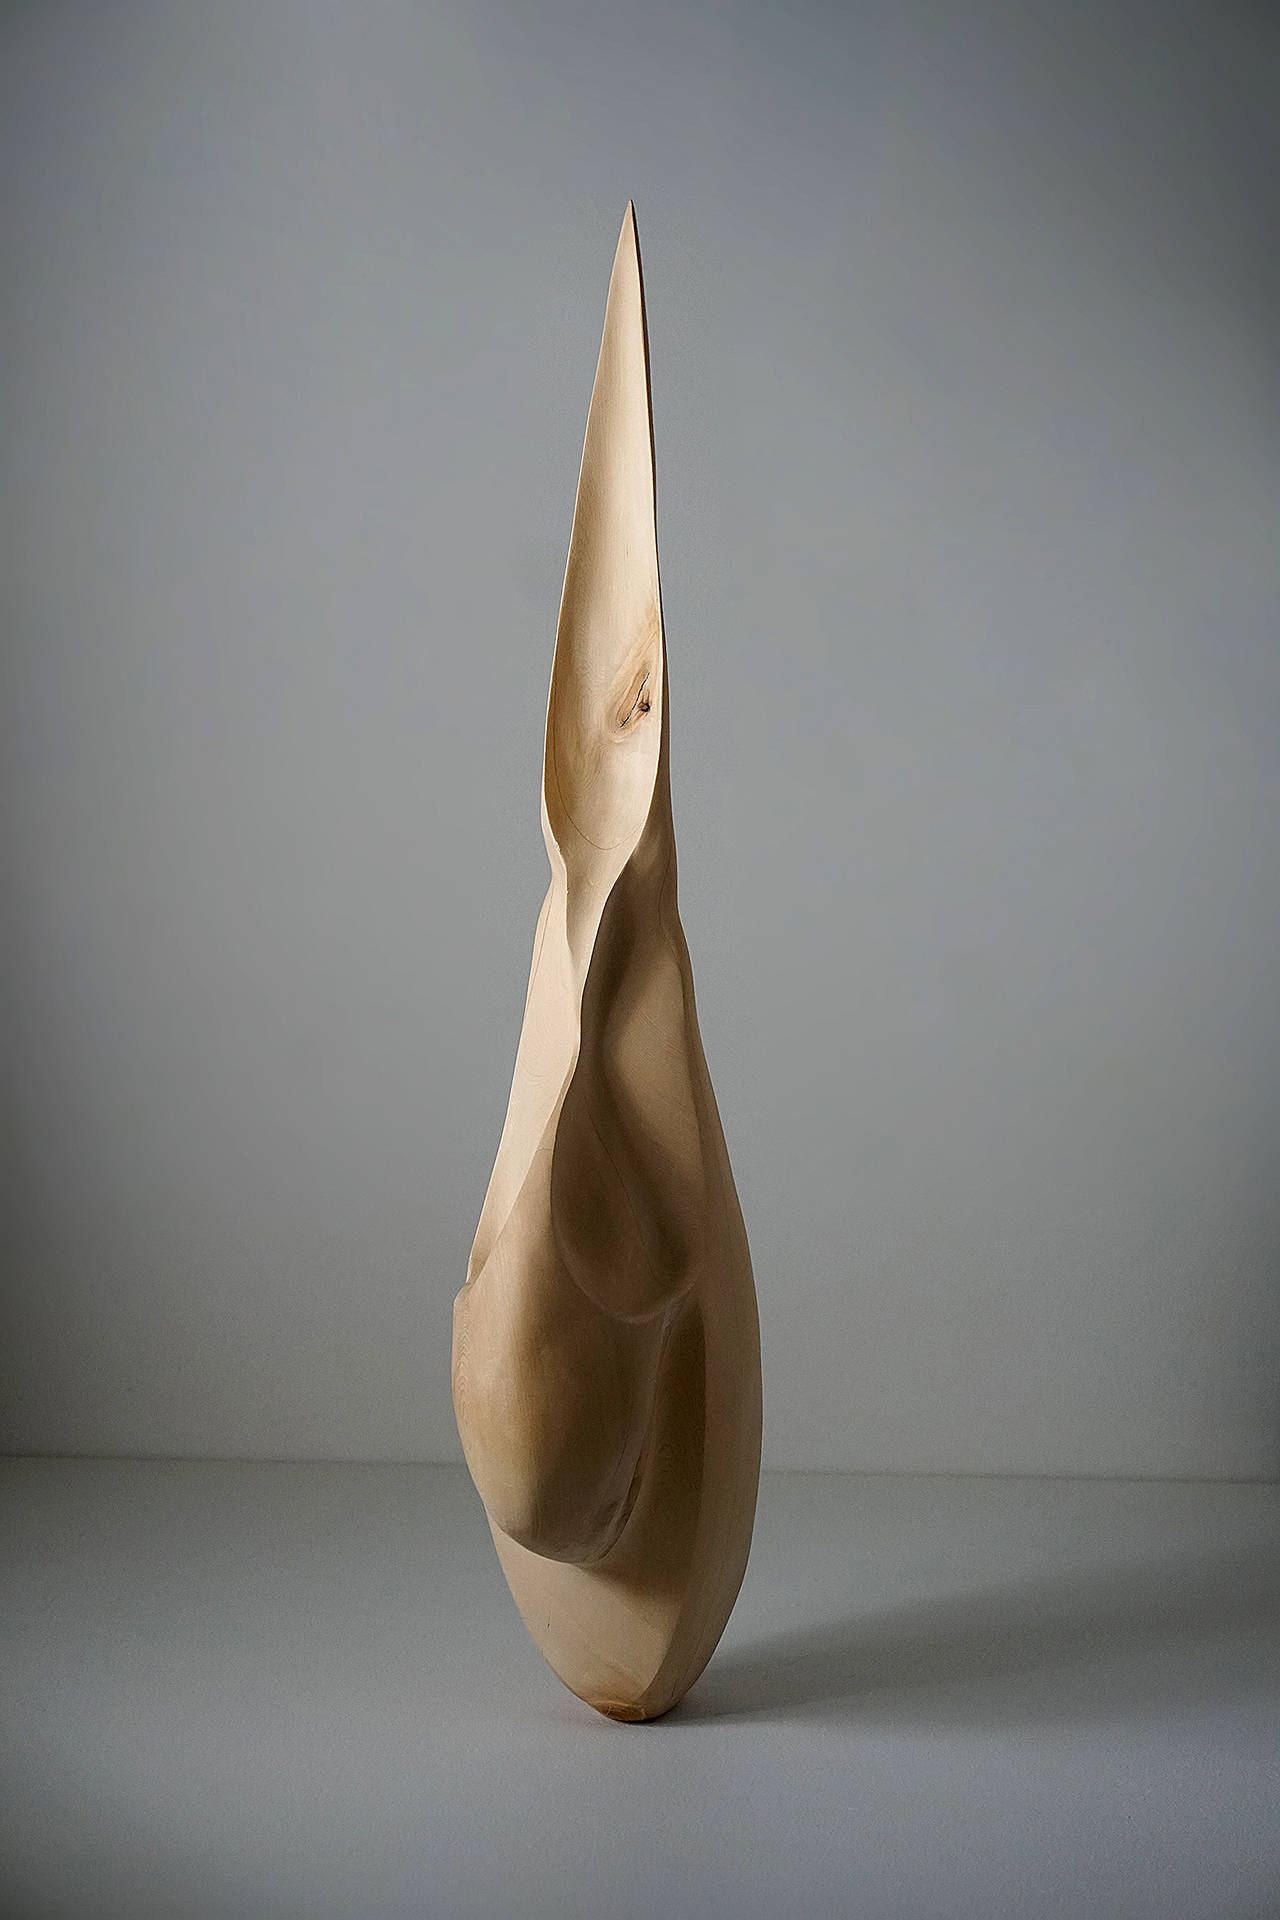 “Drop,” by Seattle-based sculptor Tyna Ontko, is part of an exhibit of her work on display through Feb. 7 at the Everett Community College gallery.